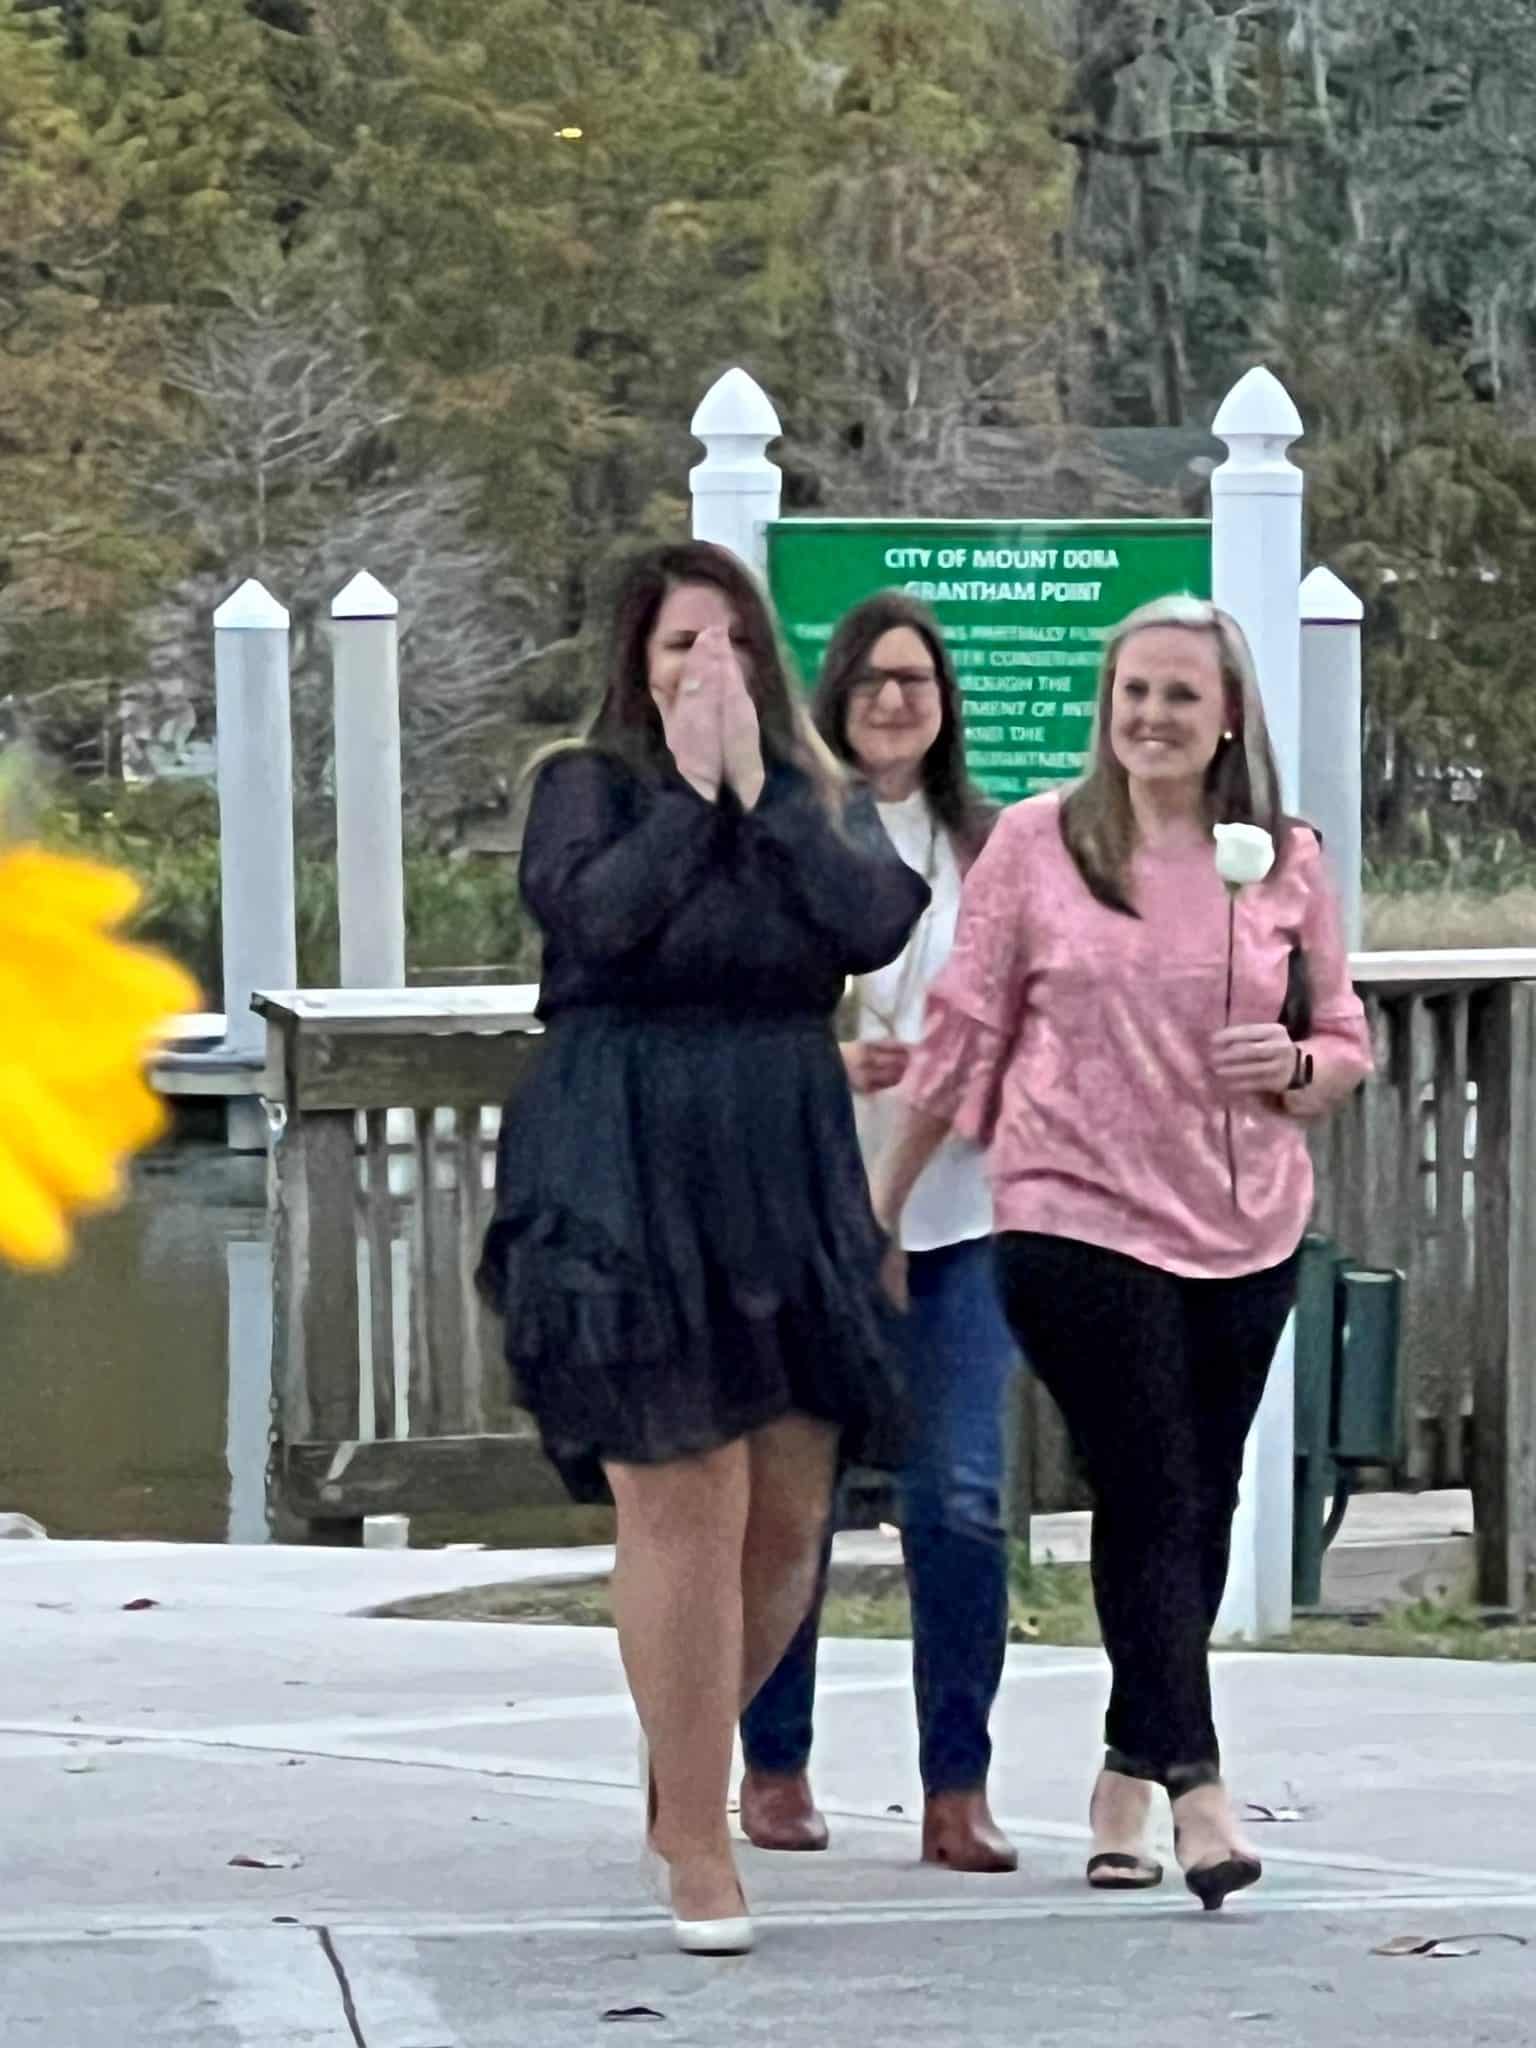 woman wearing black dress holds hands over mouth in surprise while two women walk next o her